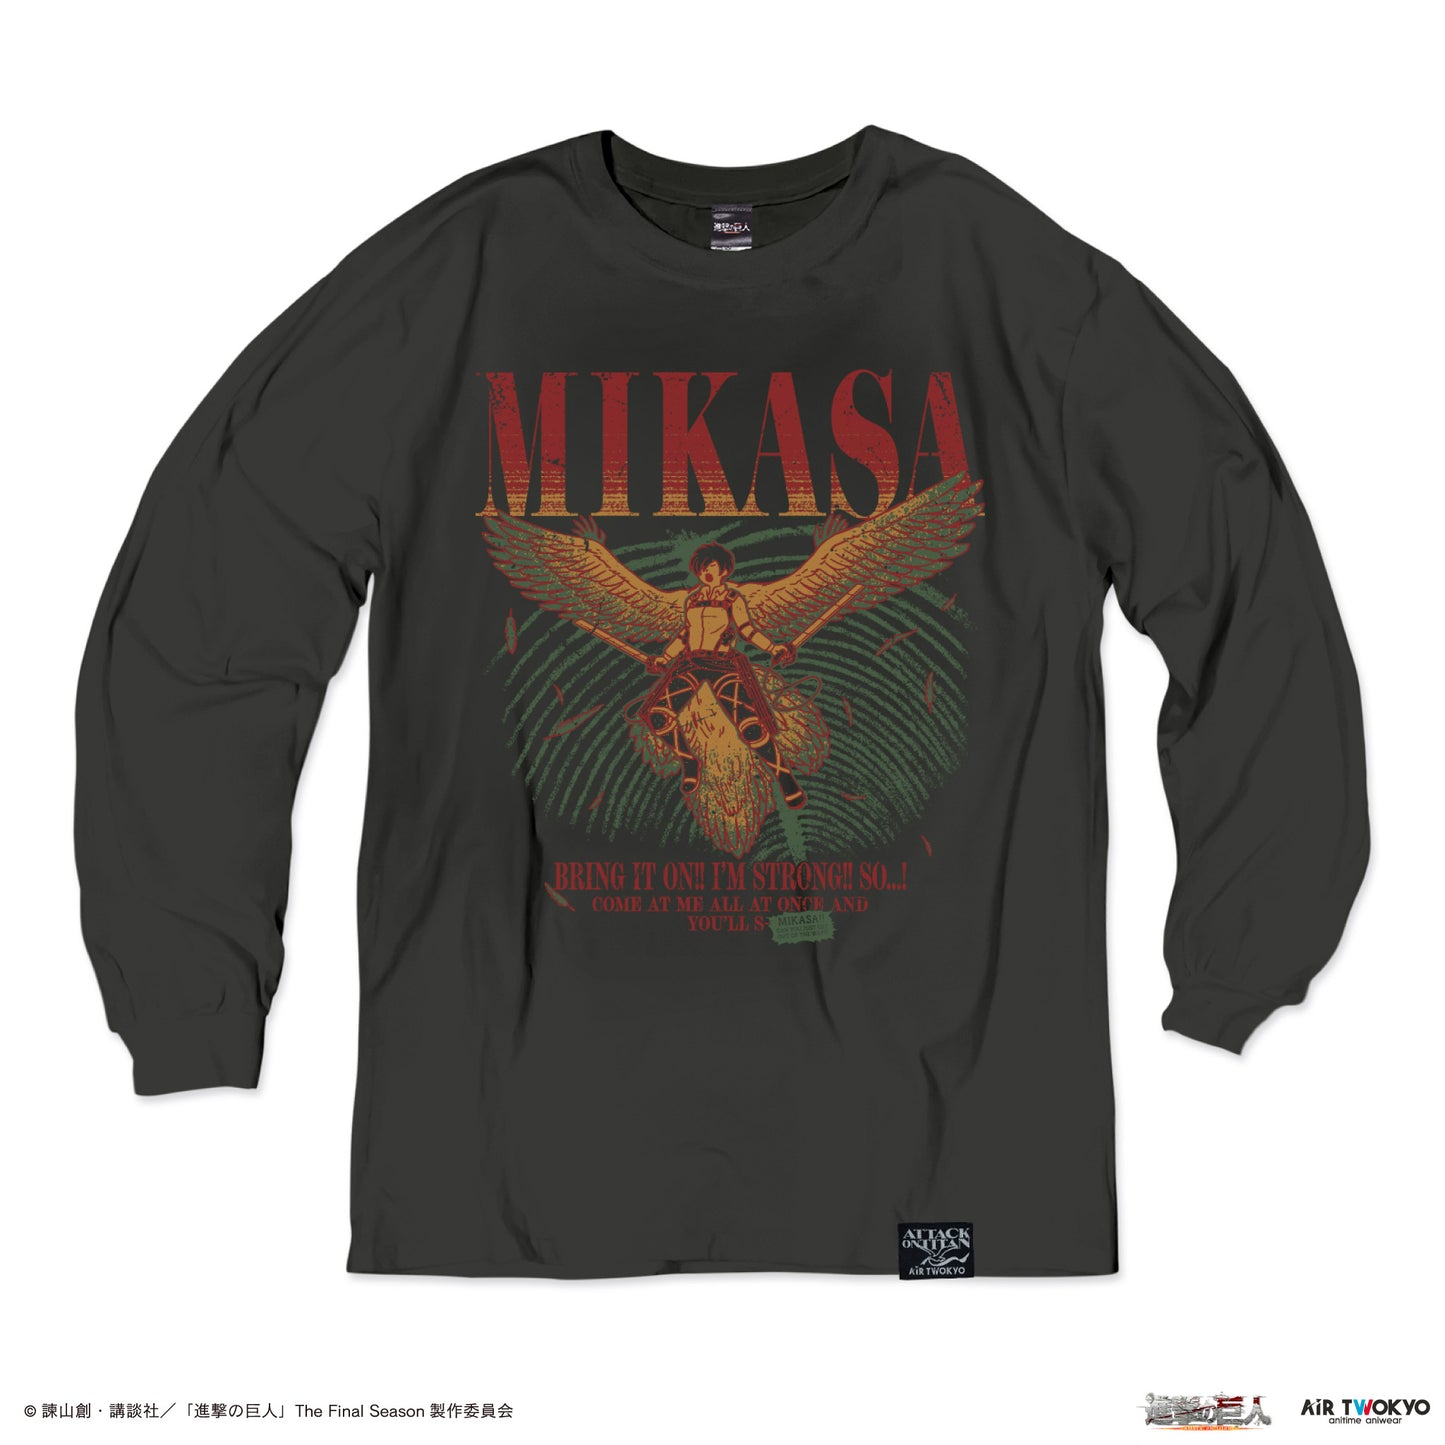 “Attack on Titan” The Final Season THE FINAL CHAPTERS Long Sleeve T-shirt 1 (BRING IT ON!! I’M STRONG!! SO…!)